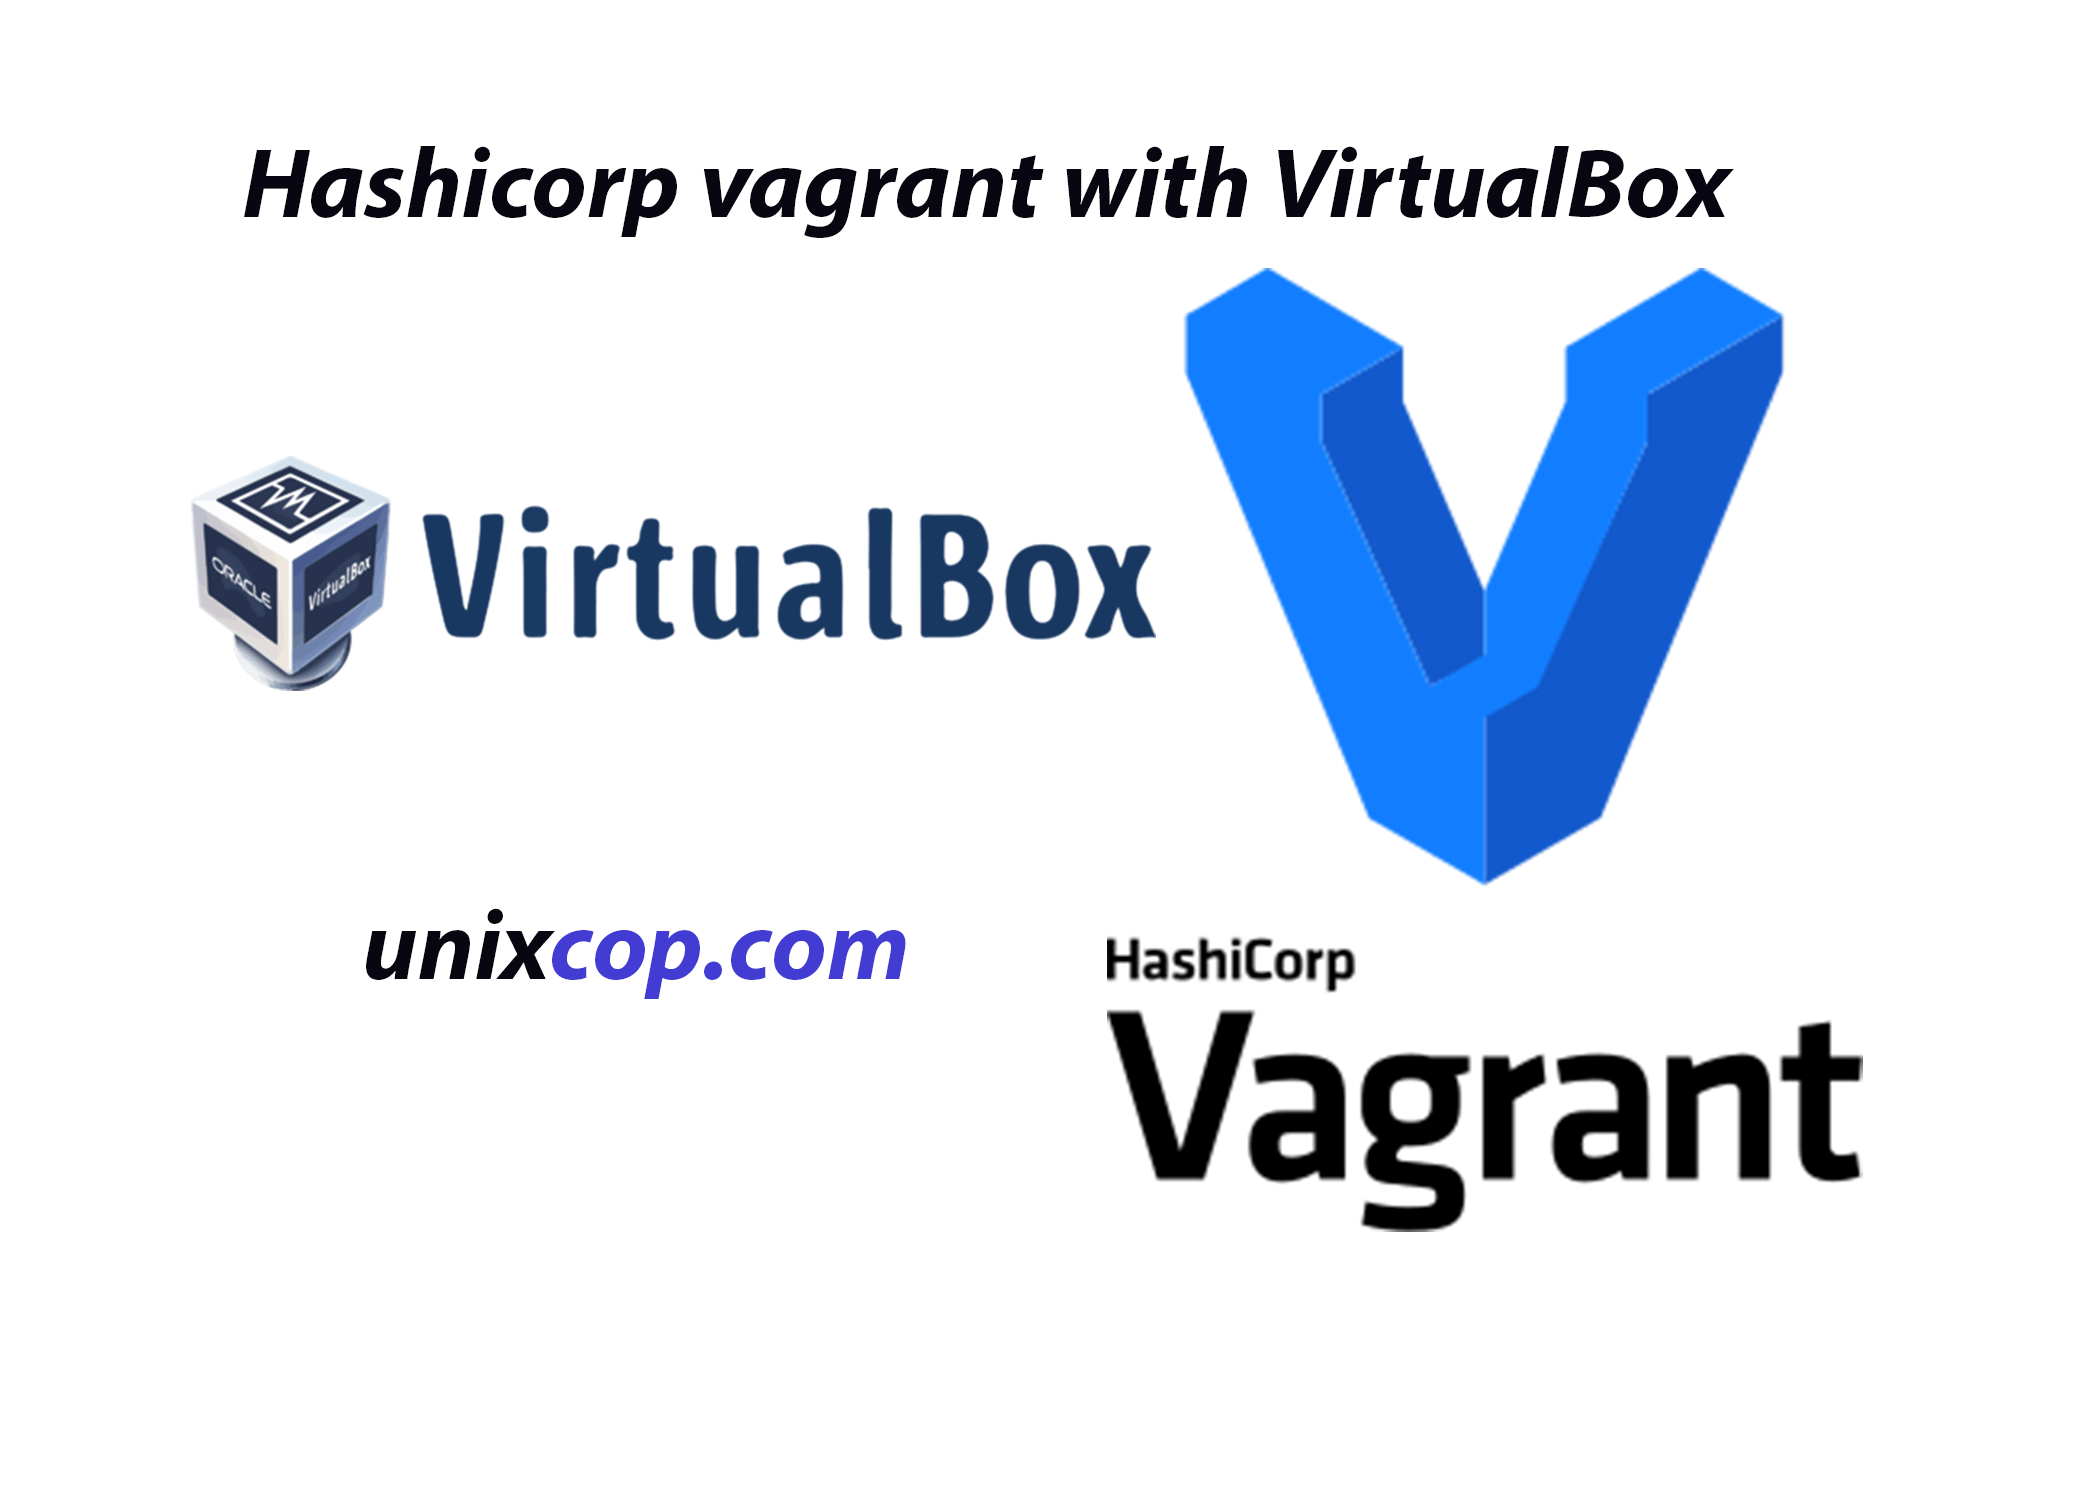 Vagrant gives easy to configure, reproducible, and transferable work ecosystems built on top of industry-standard technology and managed by a single, compatible workflow to help maximize the productivity and versatility of you and your team.